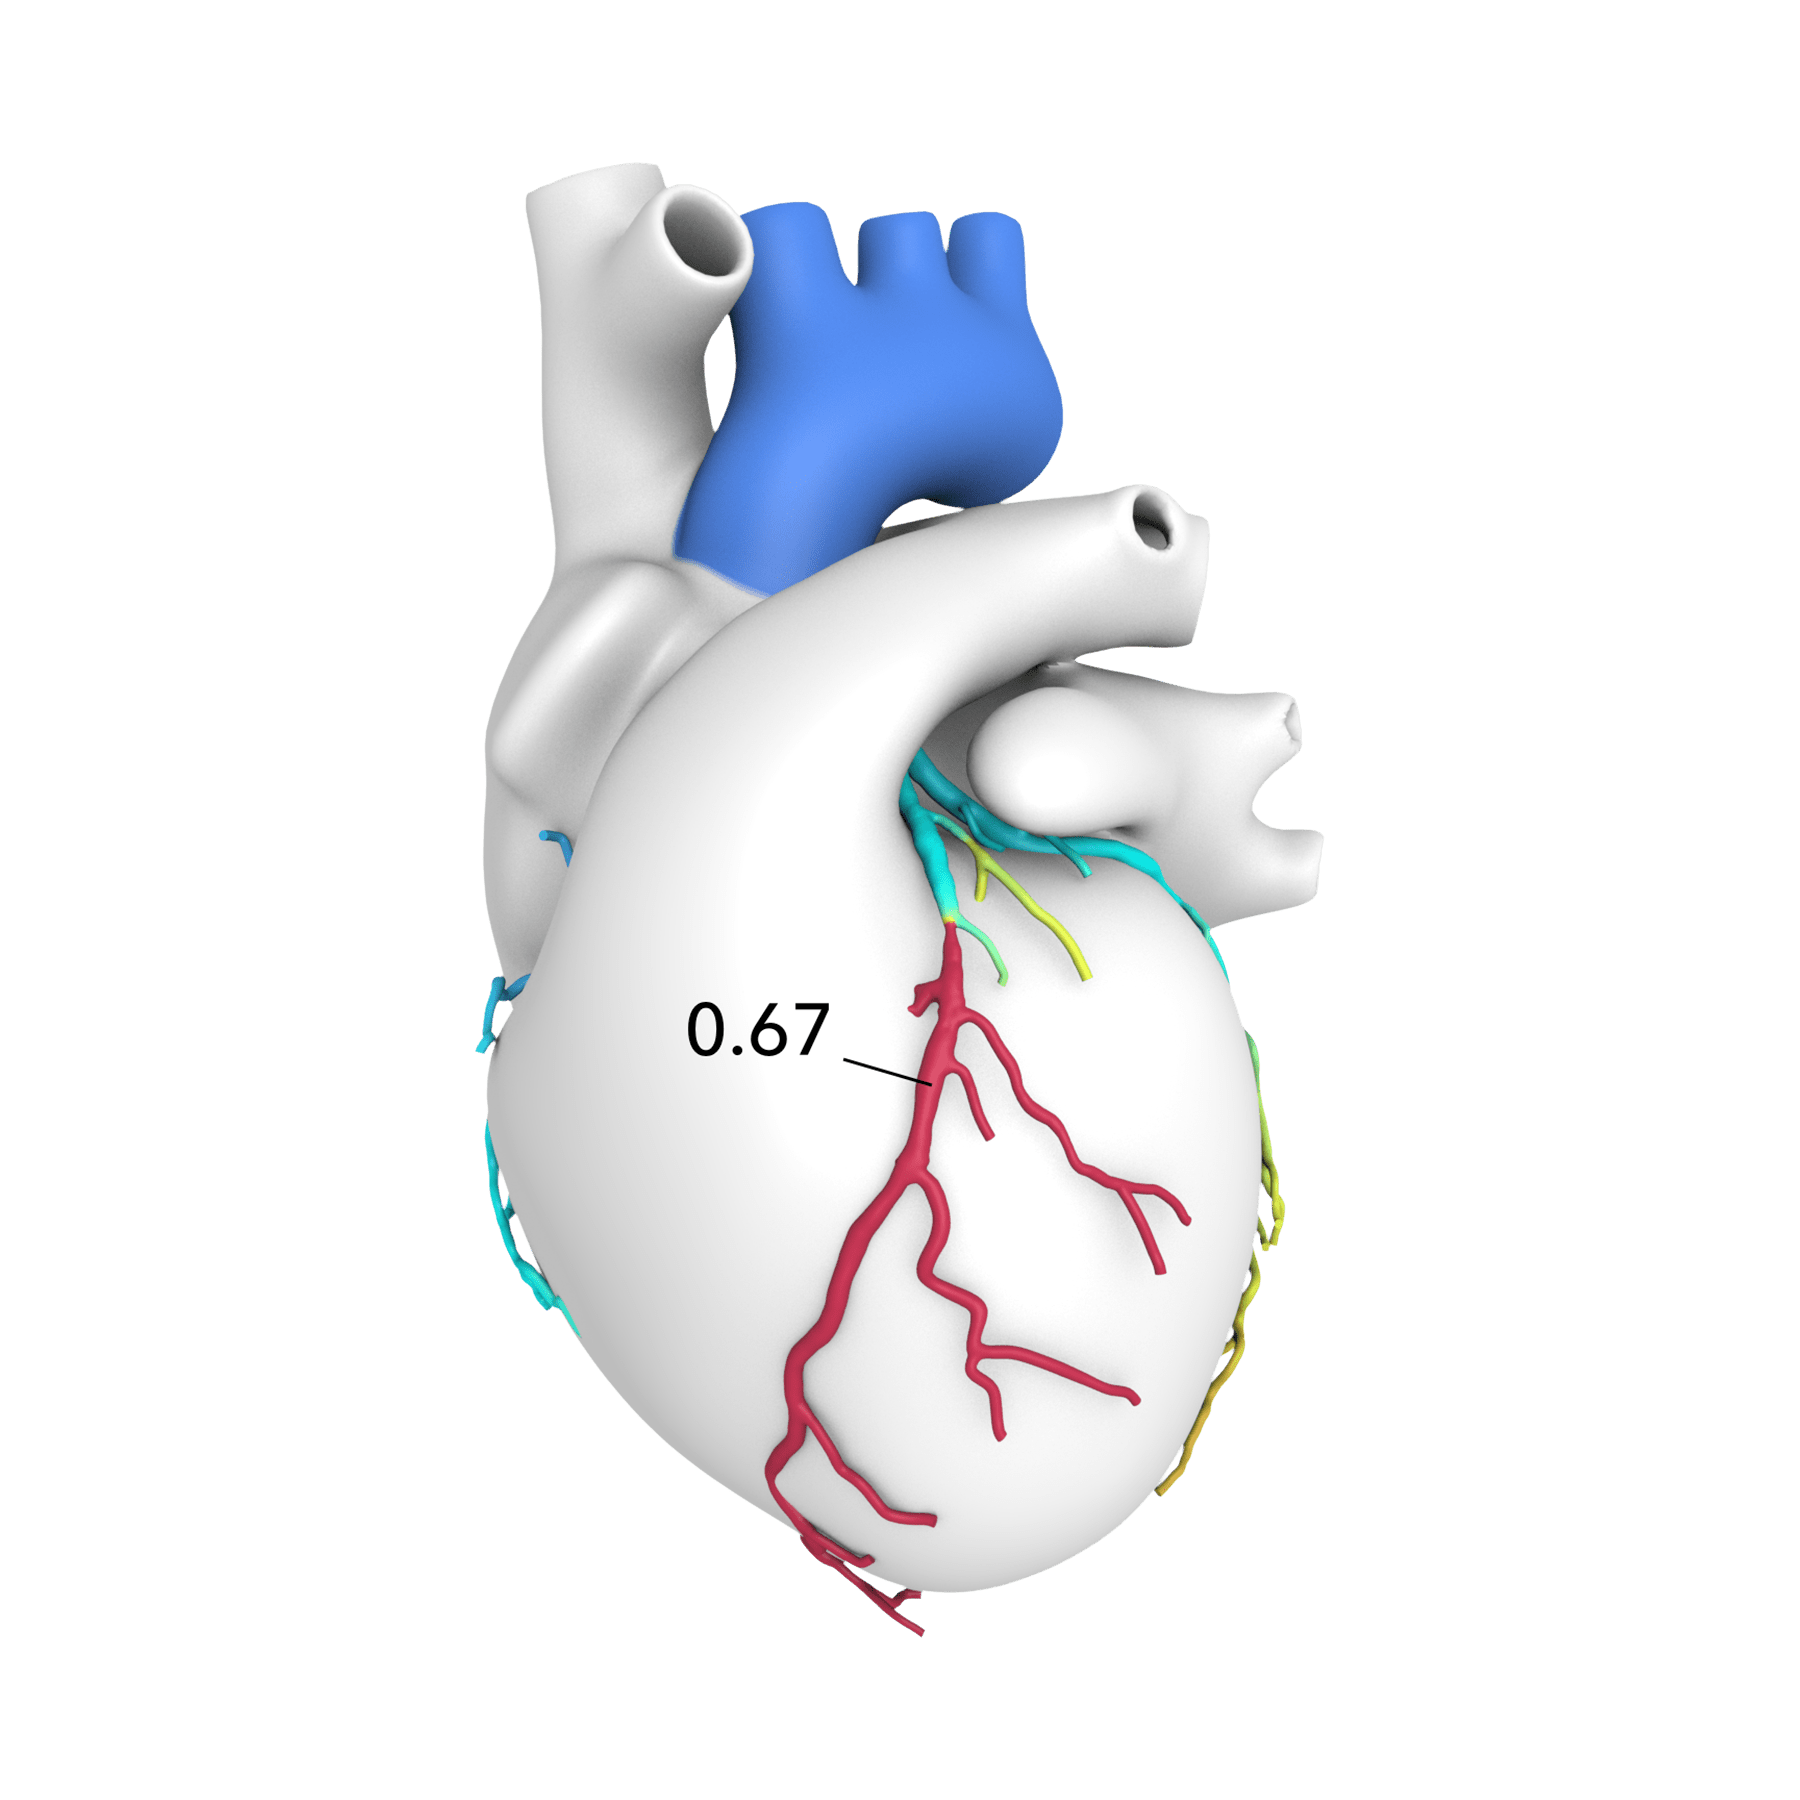 A leading edge technology called HeartFlow Analysis combines CT imaging with powerful computer algorithms to create a personalized, color coded 3D model of coronary arteries. 